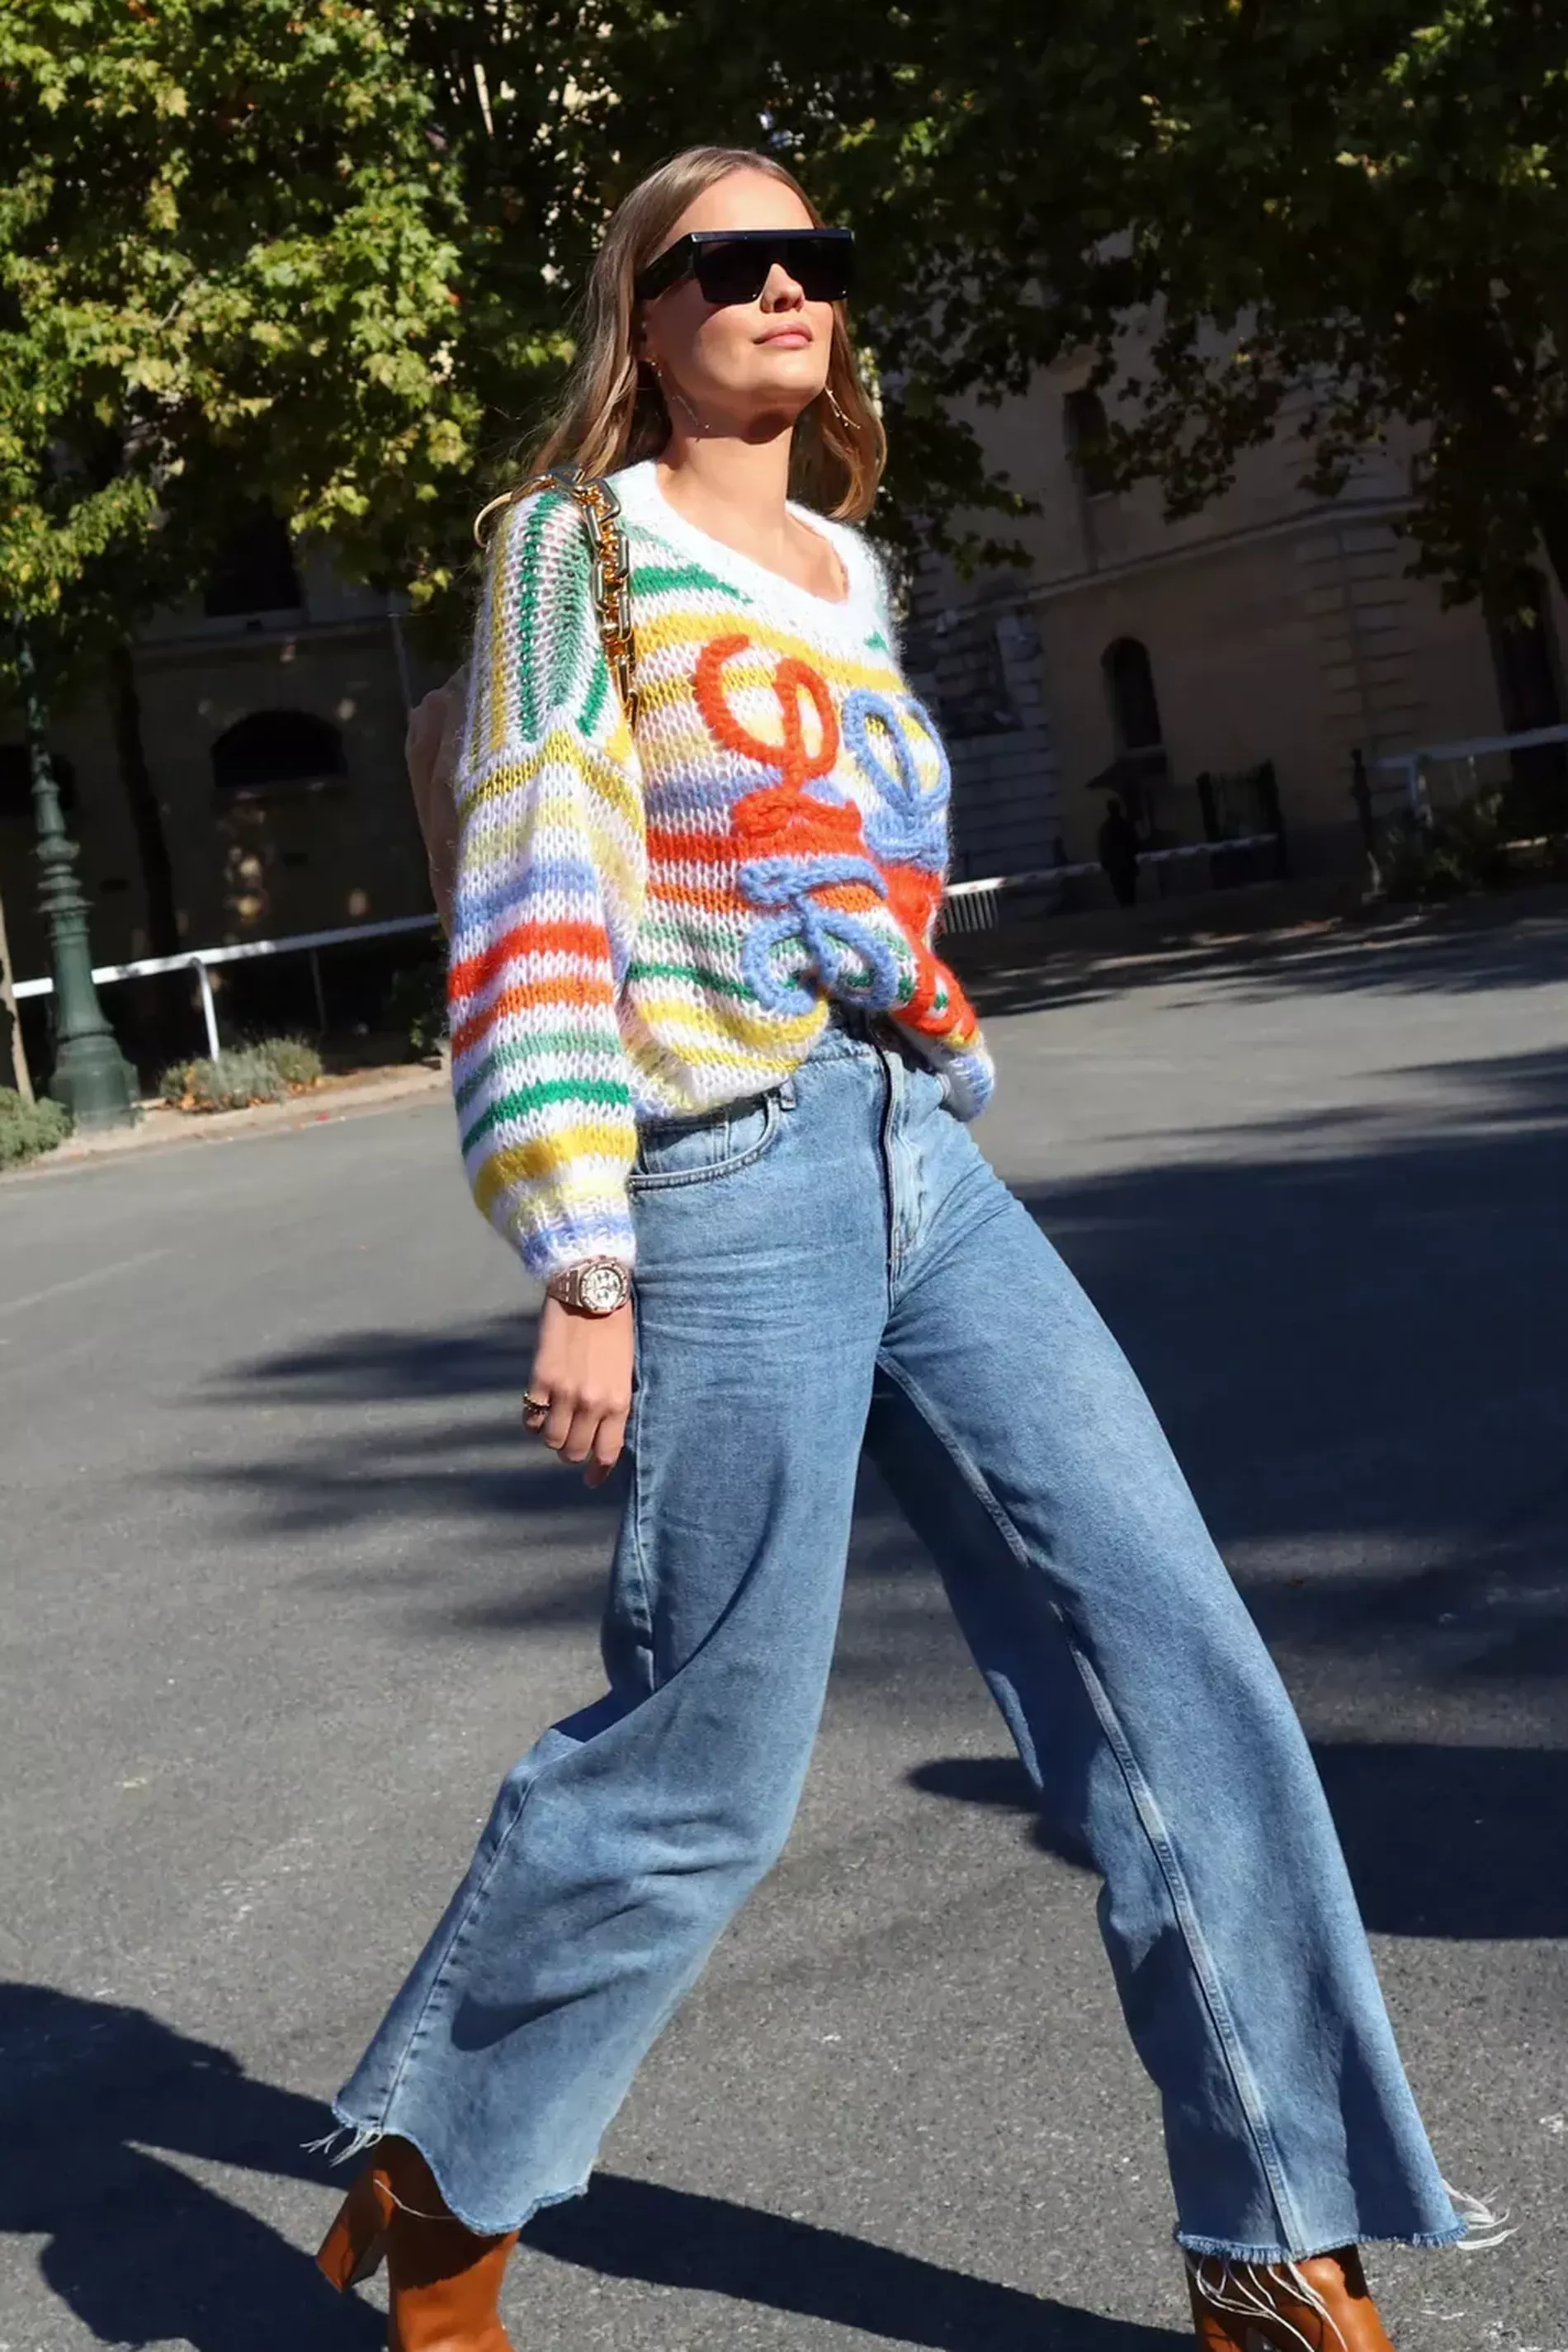 Paris fashion week guest wears colourful striped sweater with blue jeans and heeled brown boots 